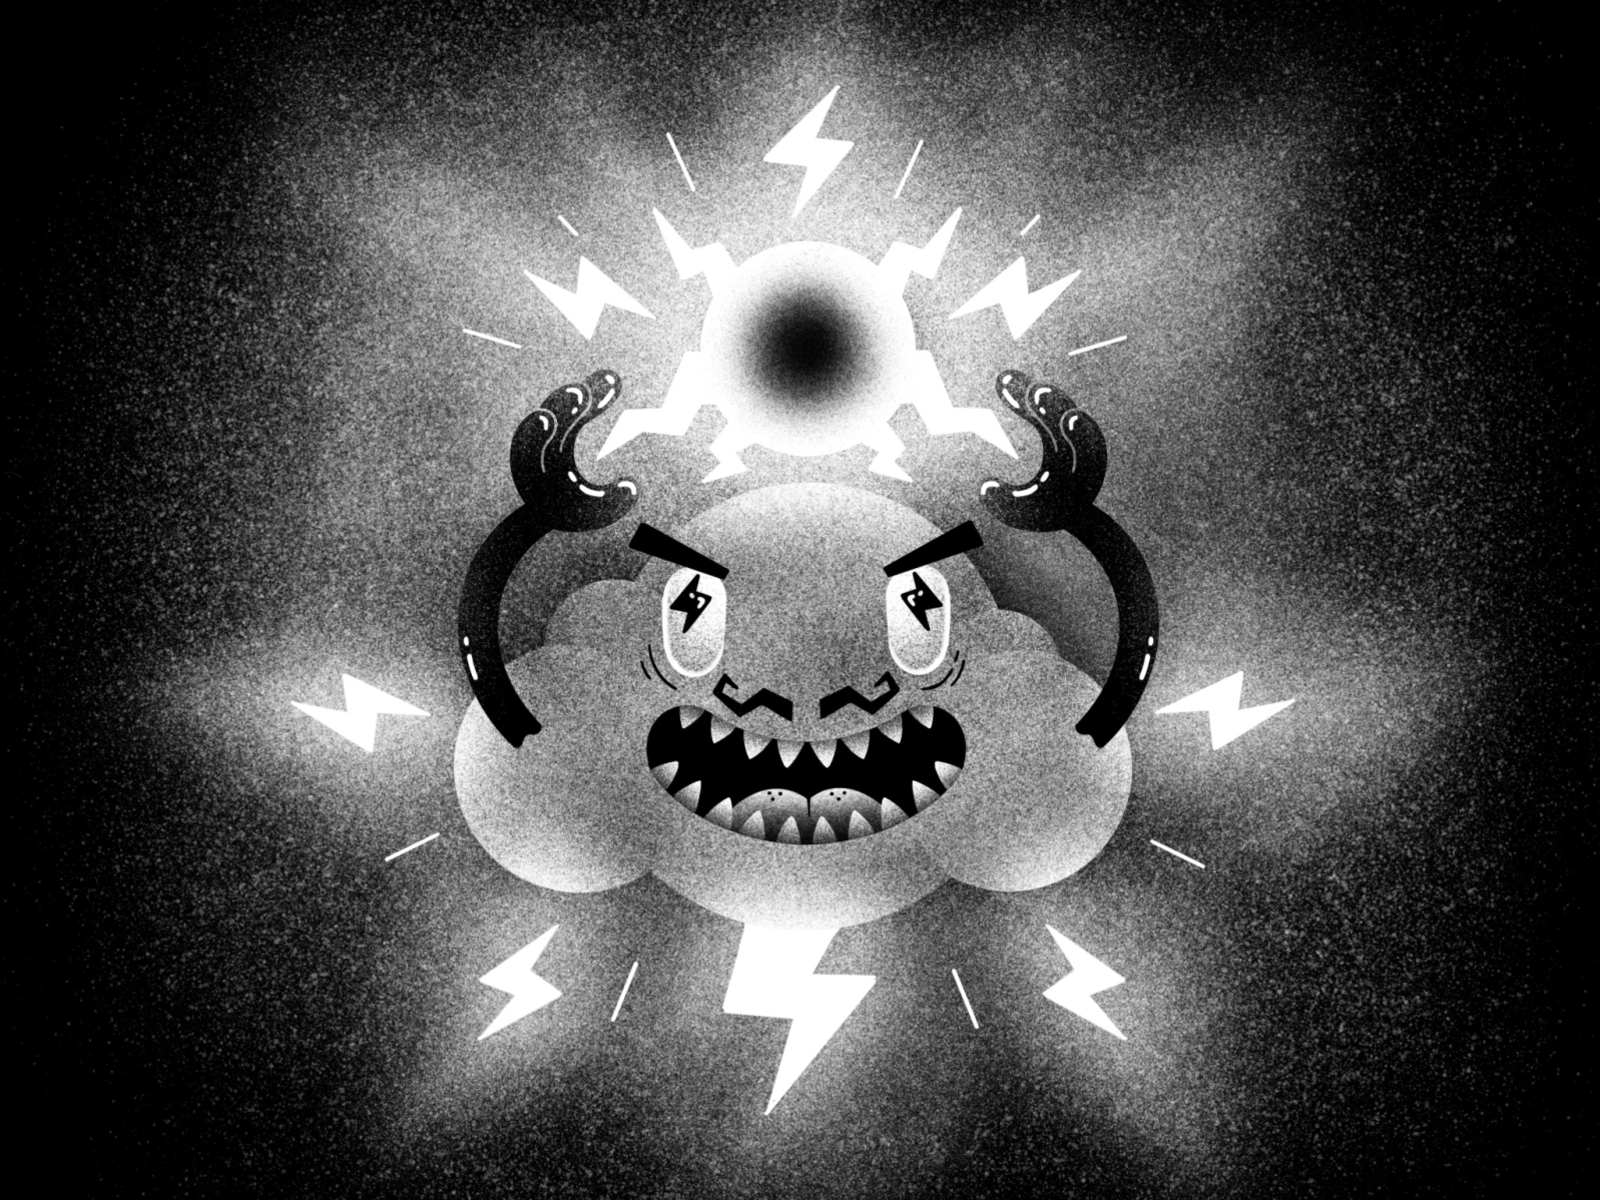 Inktober #17 - Storm black and white character cloud crazy energy evil grain illustration ink inktober inktober2020 inktober52 laugh lightning mad mustache storm texture thierry fousse